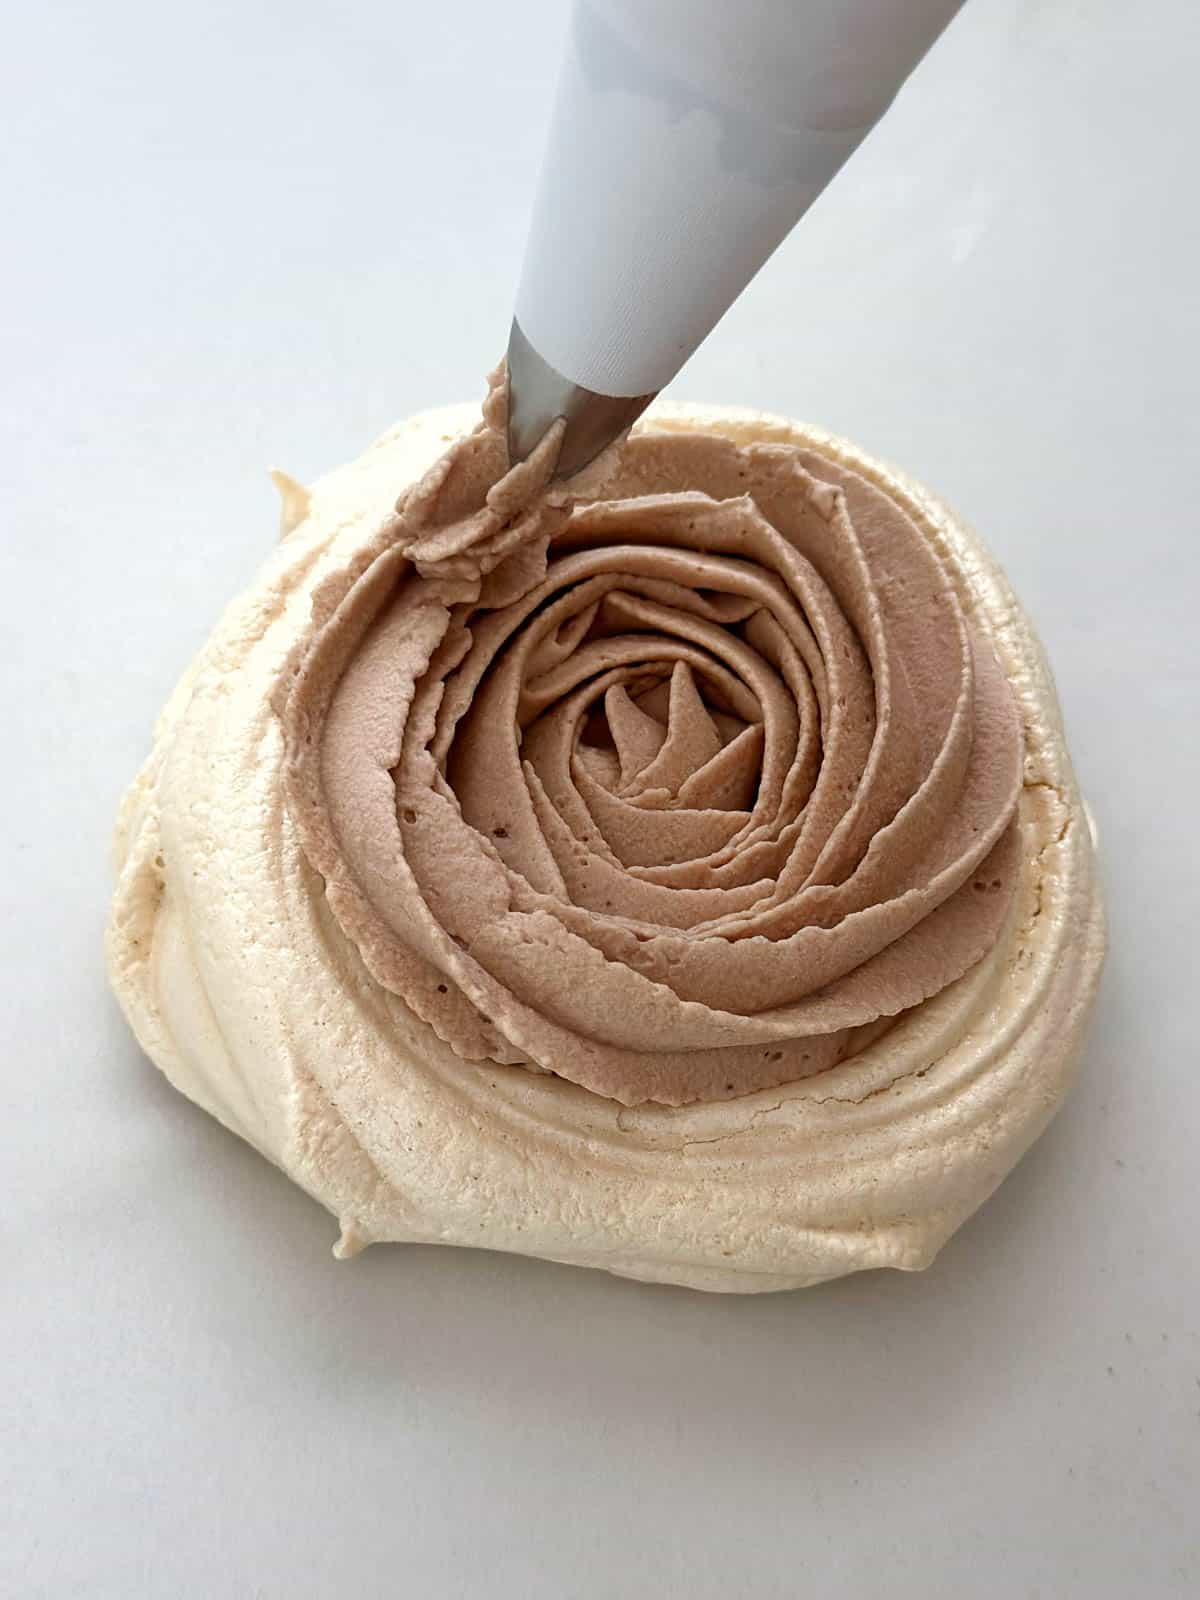 Piping chocolate whipped cream onto a meringue nest.